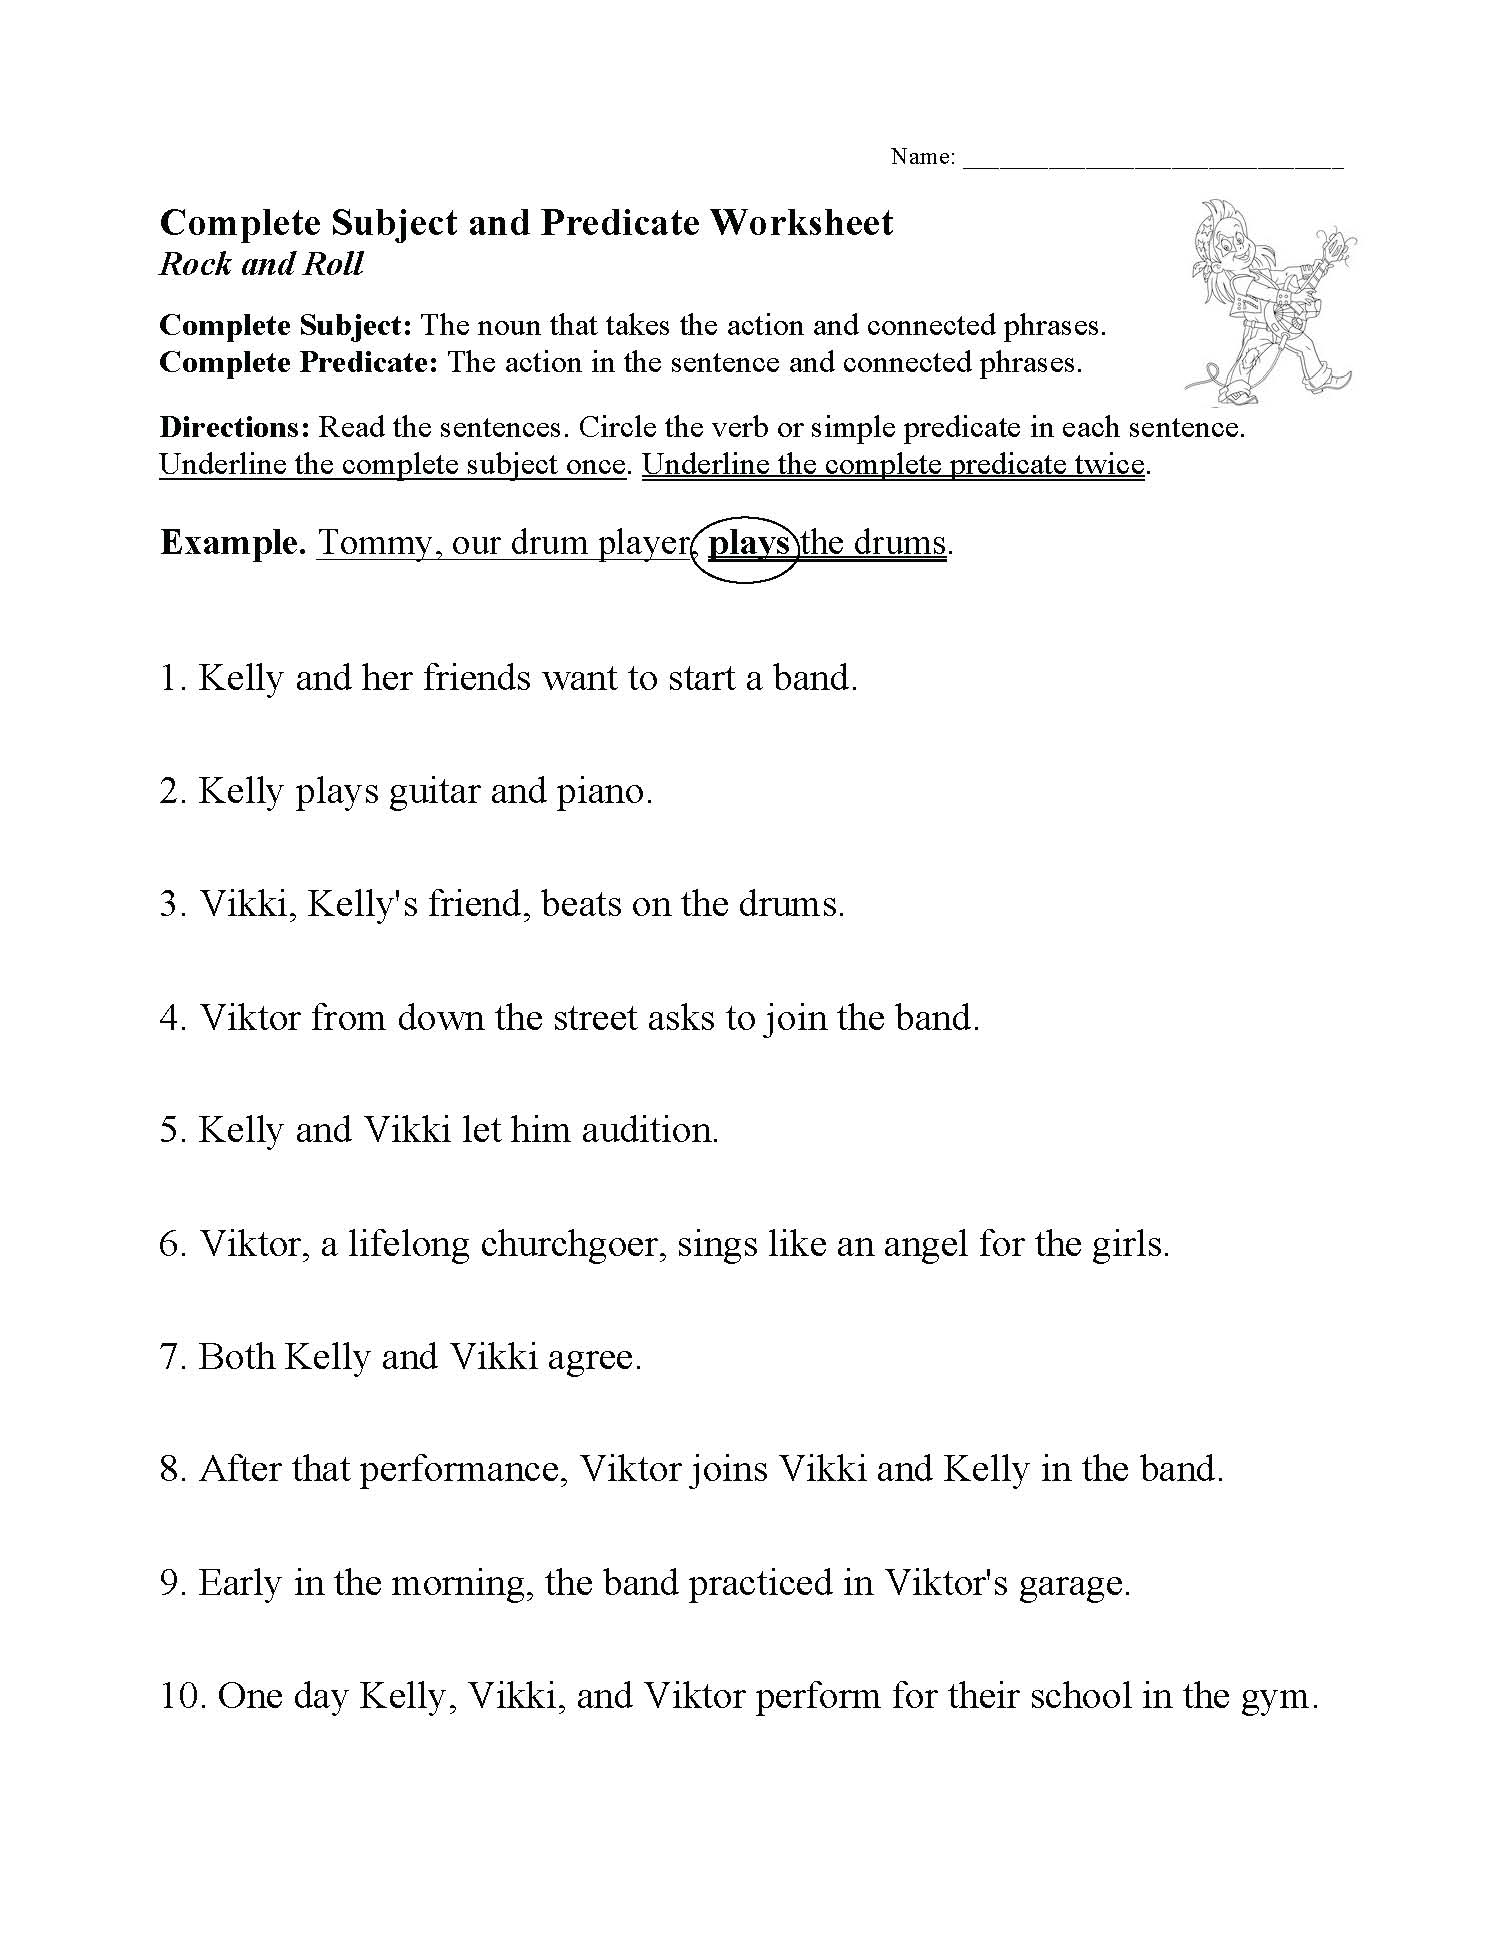 This is a preview image of our Complete Subject and Predicate Worksheet. Click on it to enlarge this image and view the source file.